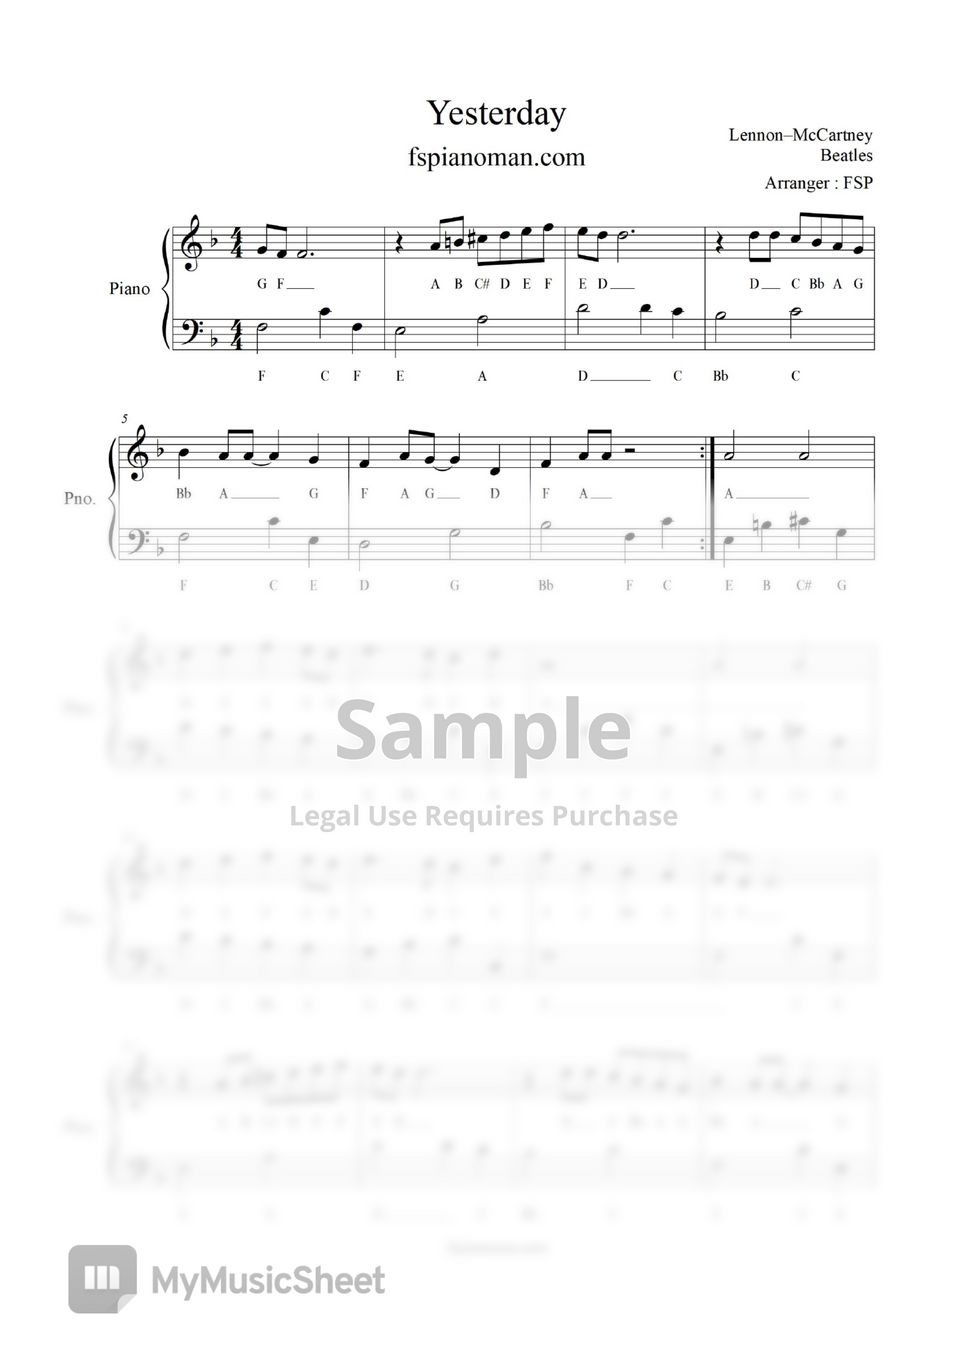 Beatles - Yesterday (Notes Sheet Musi) Partition musicale by freestyle ...